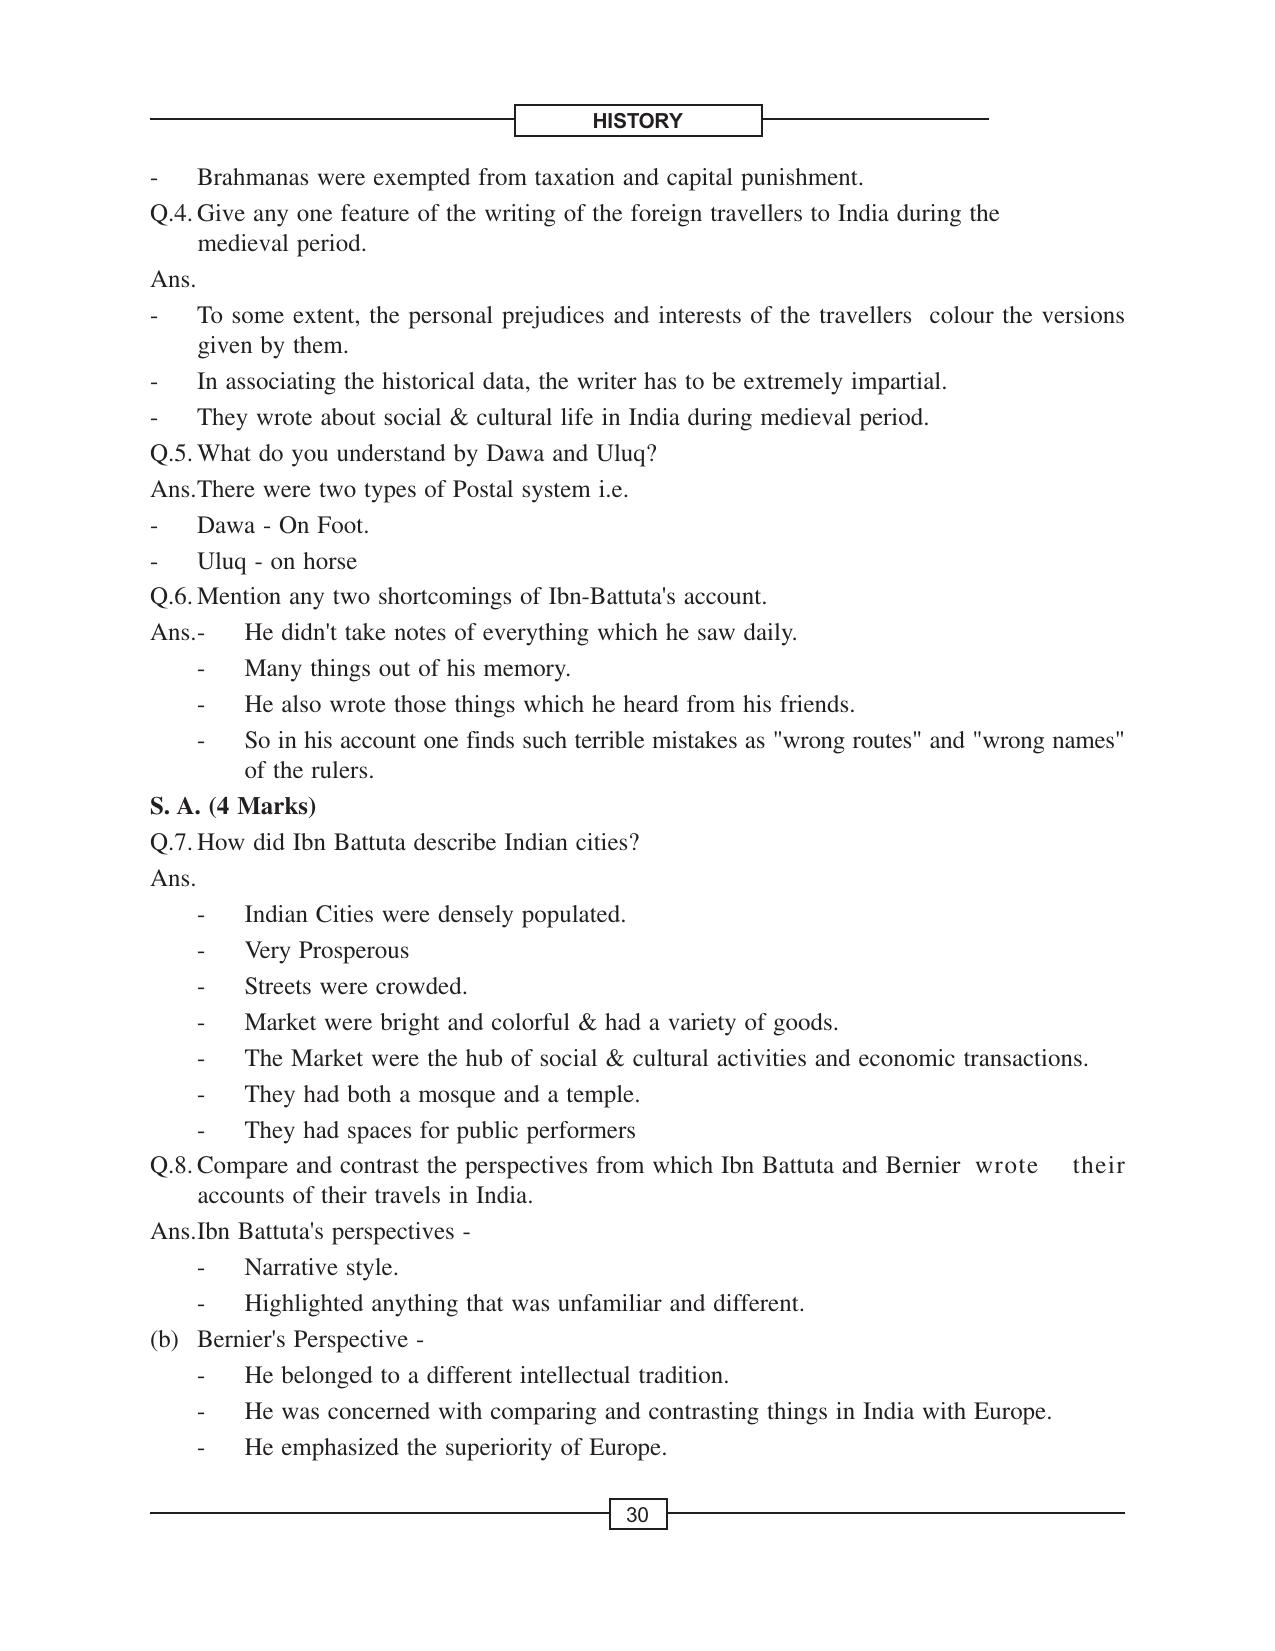 CBSE Class 12 History Through The Eyes Of Travellers Perceptions Of Society - Page 2